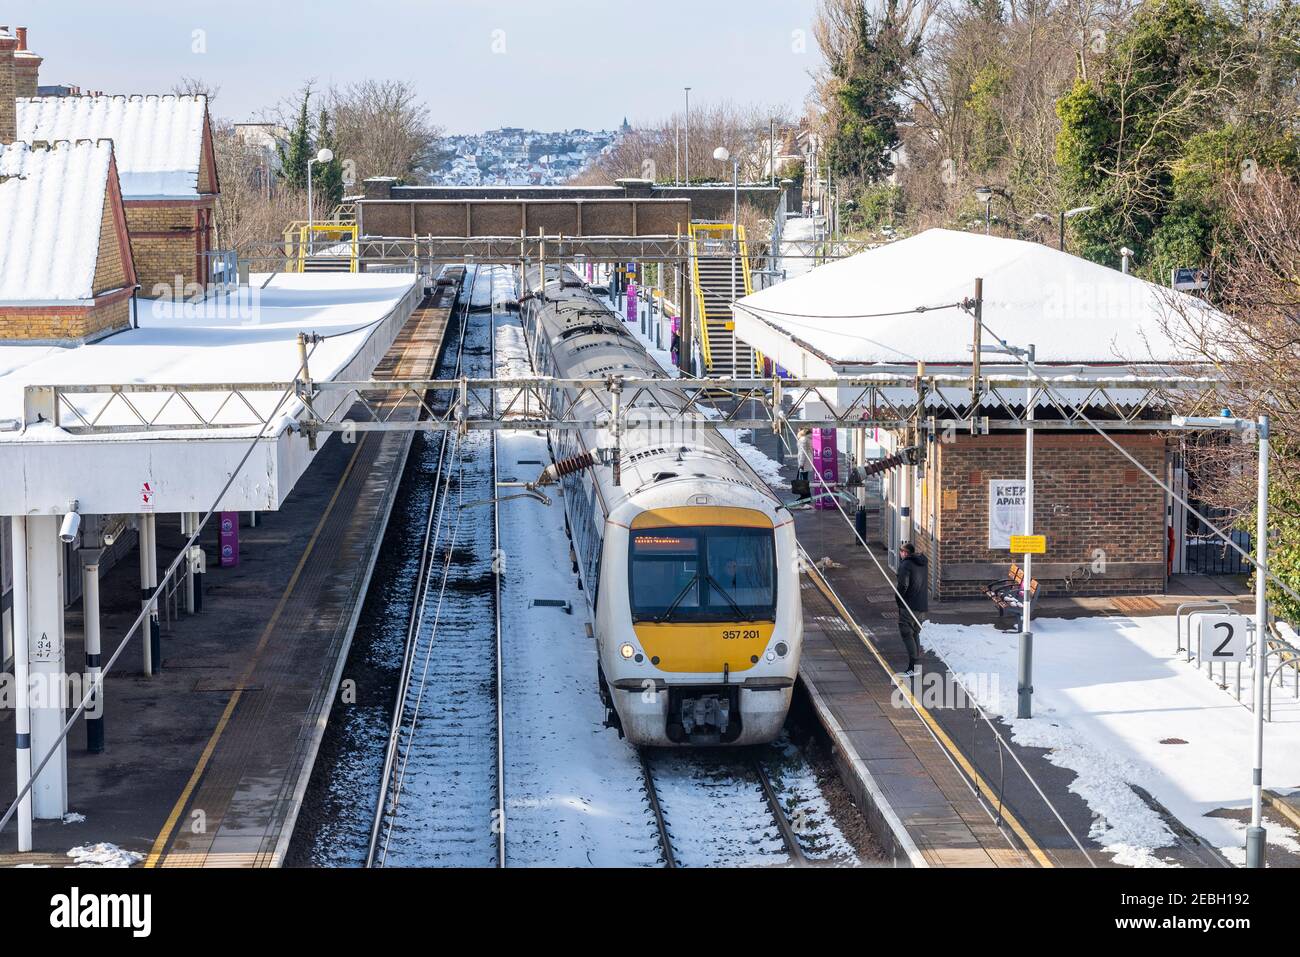 C2C train in Westcliff on Sea station, Southend Borough, Essex, UK, with snow from Storm Darcy. London Tilbury Southend line railway. Platform Stock Photo